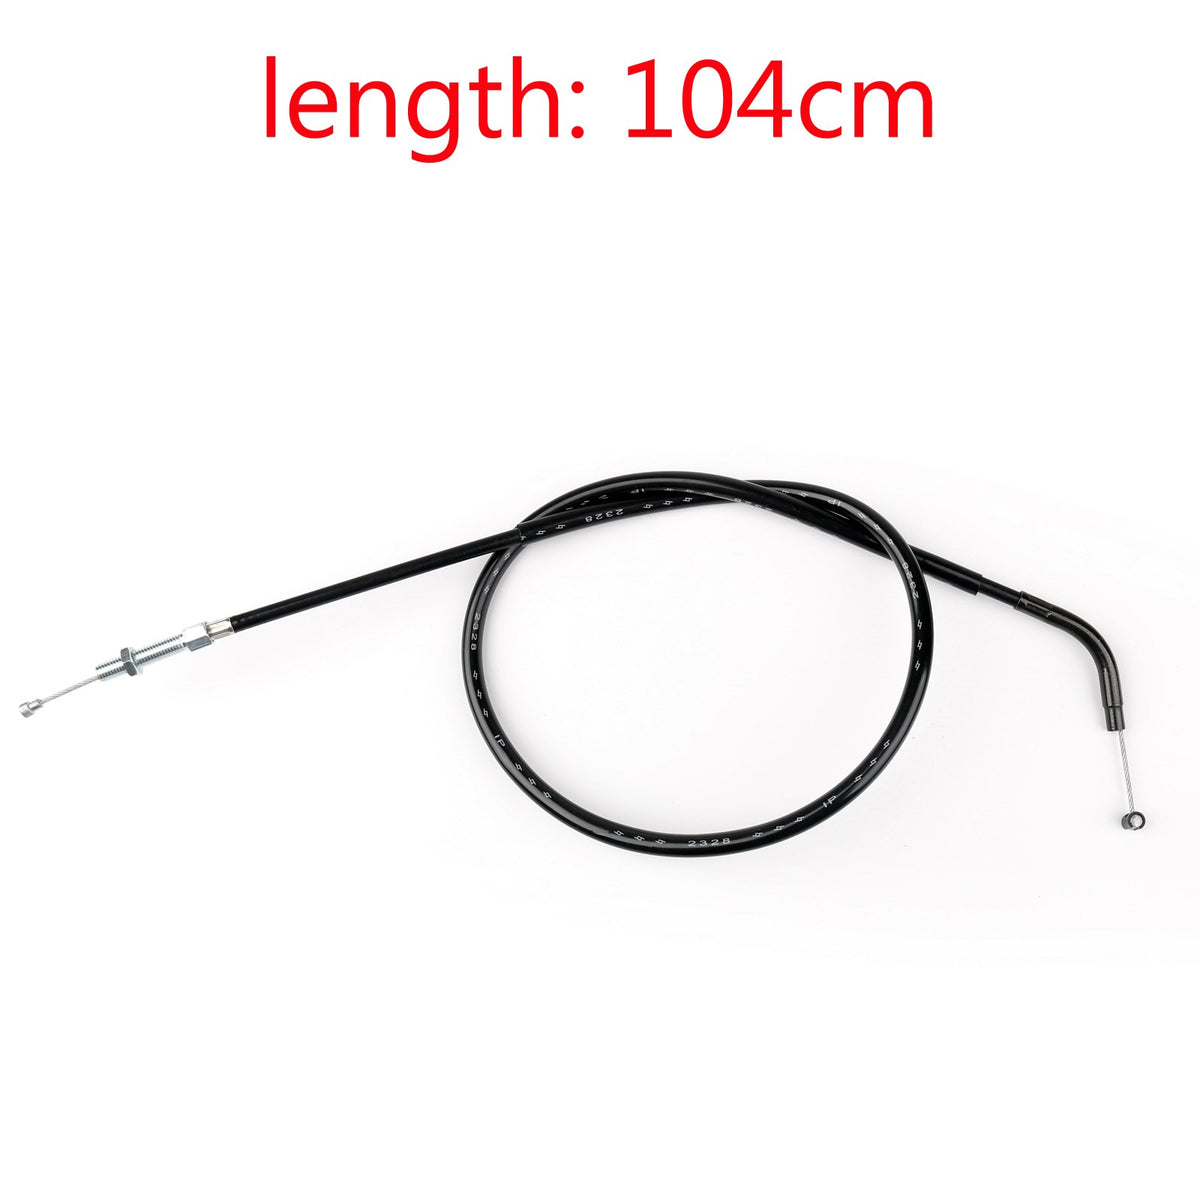 Wire Steel Clutch Cable Replacement For Suzuki SV650 SV650N 2003-2012